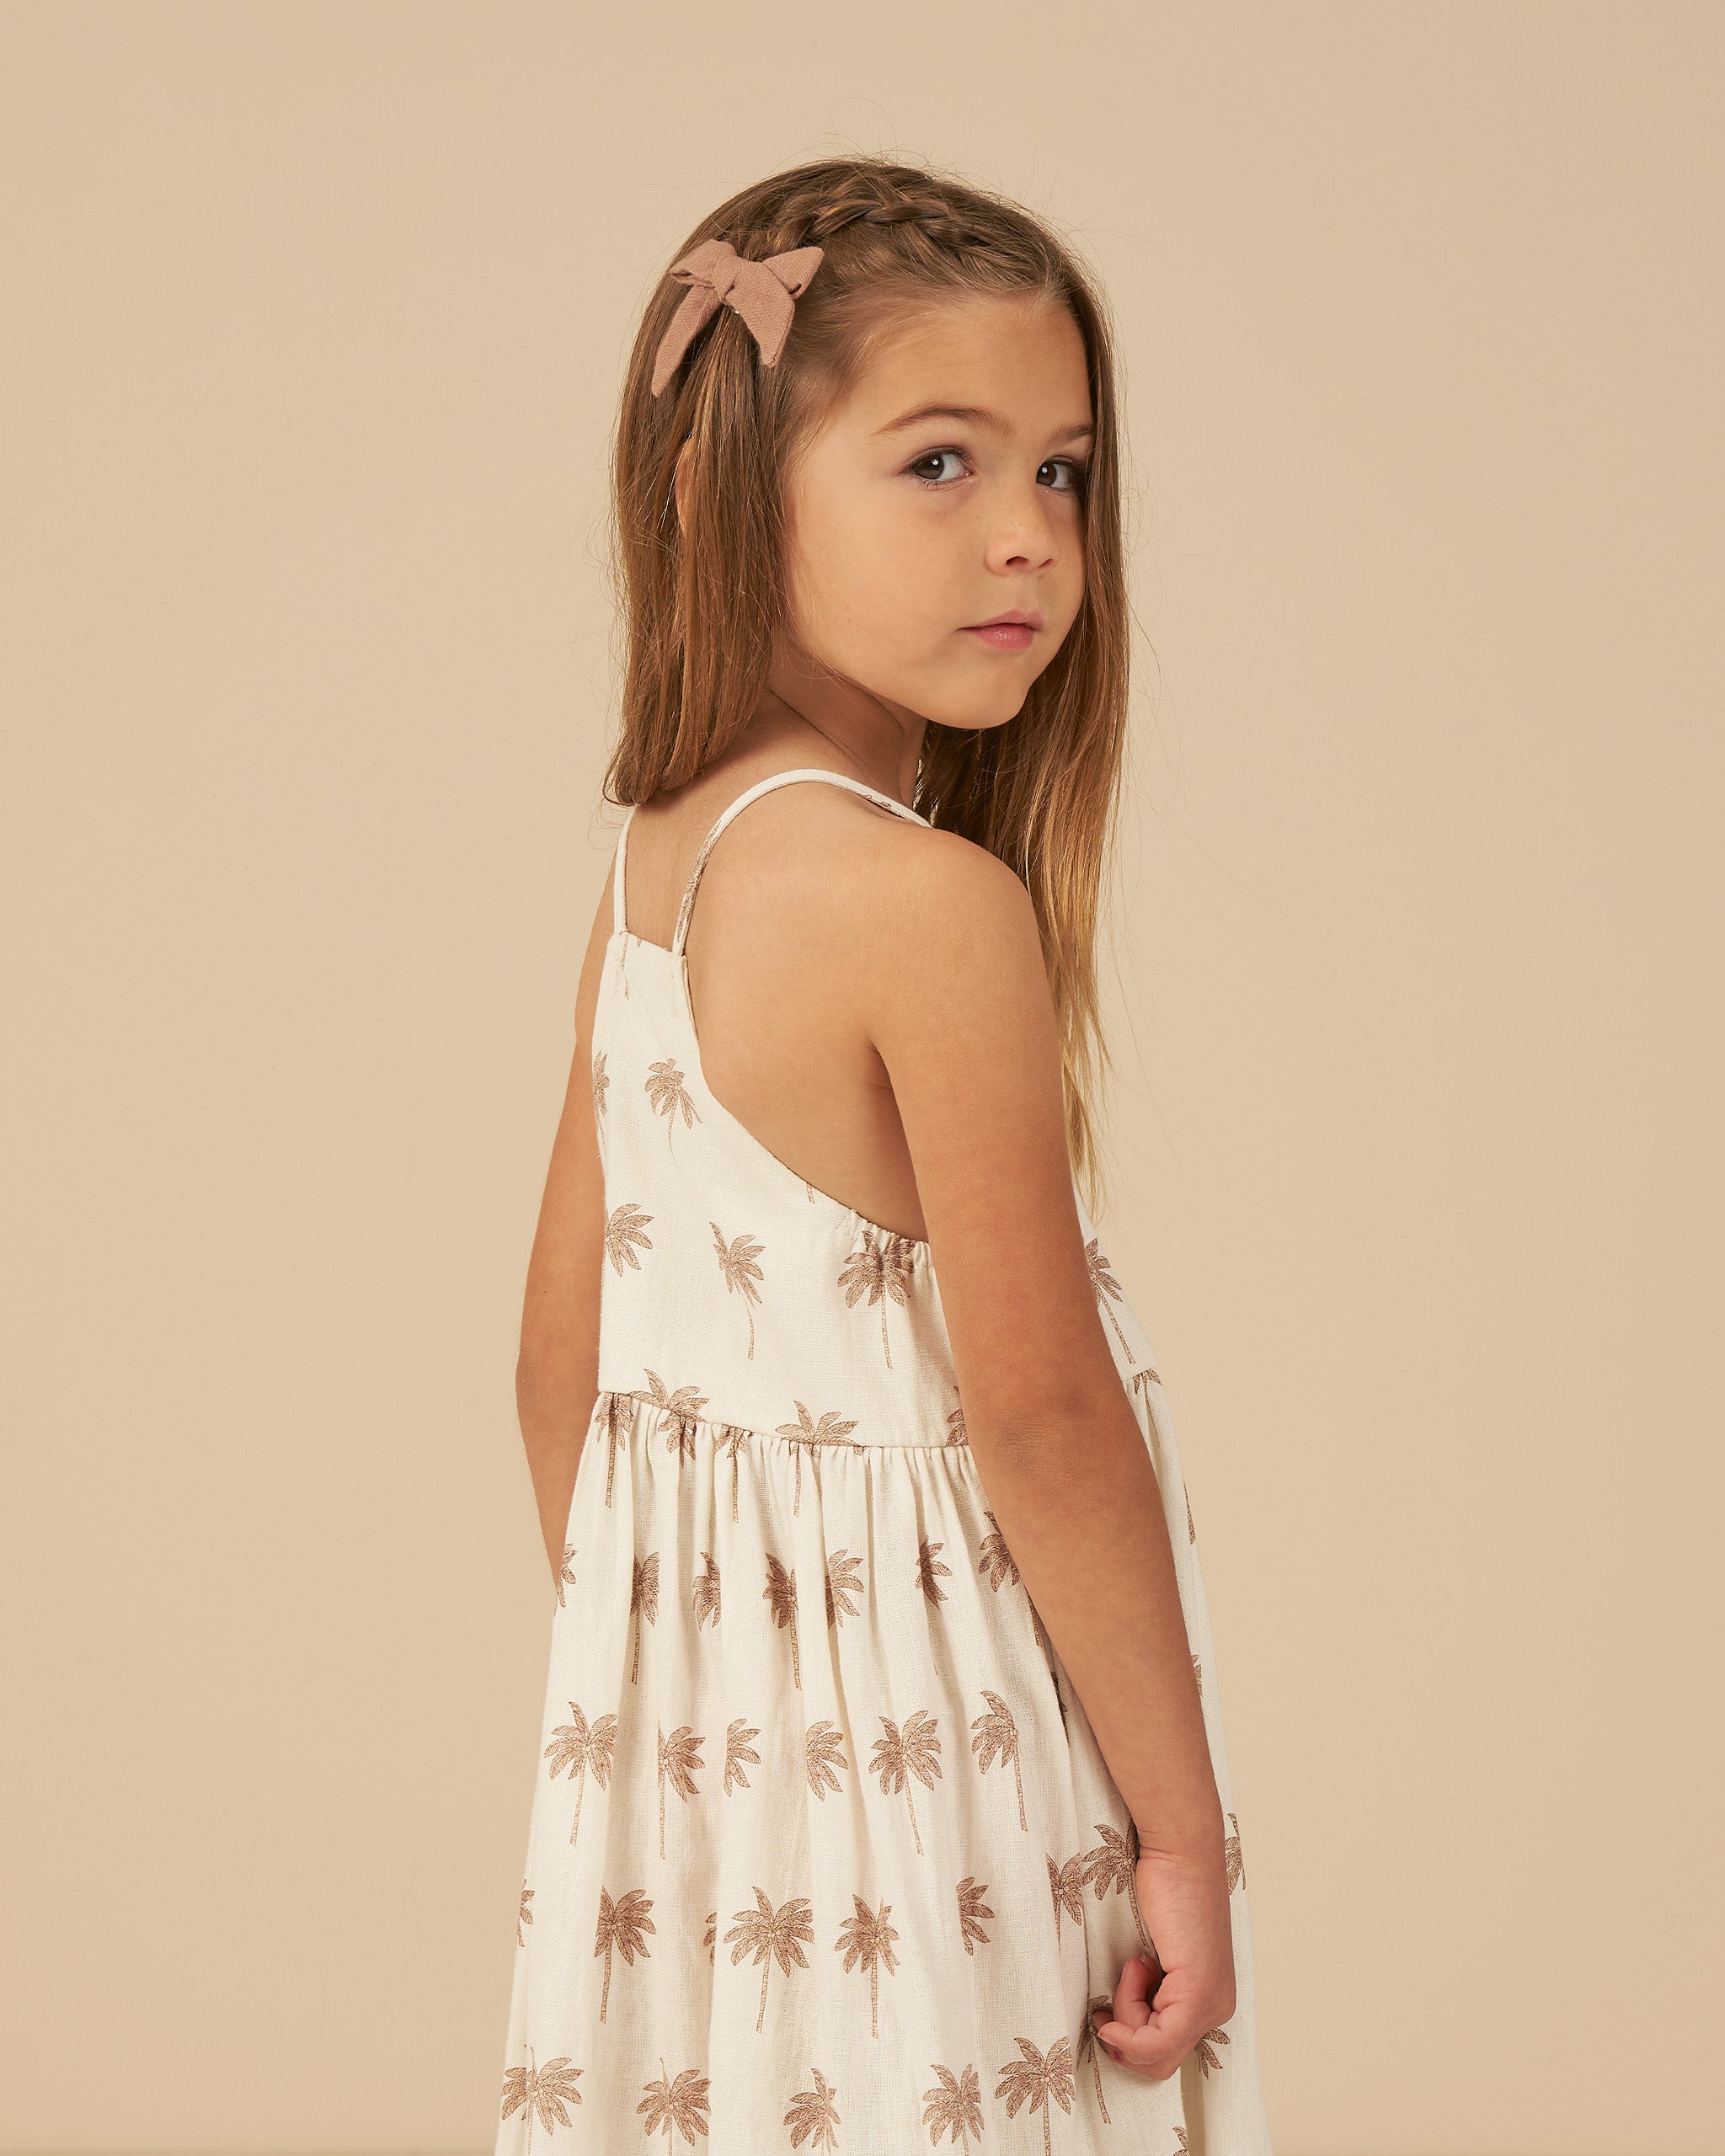 Ava Dress || Paradise - Rylee + Cru | Kids Clothes | Trendy Baby Clothes | Modern Infant Outfits |